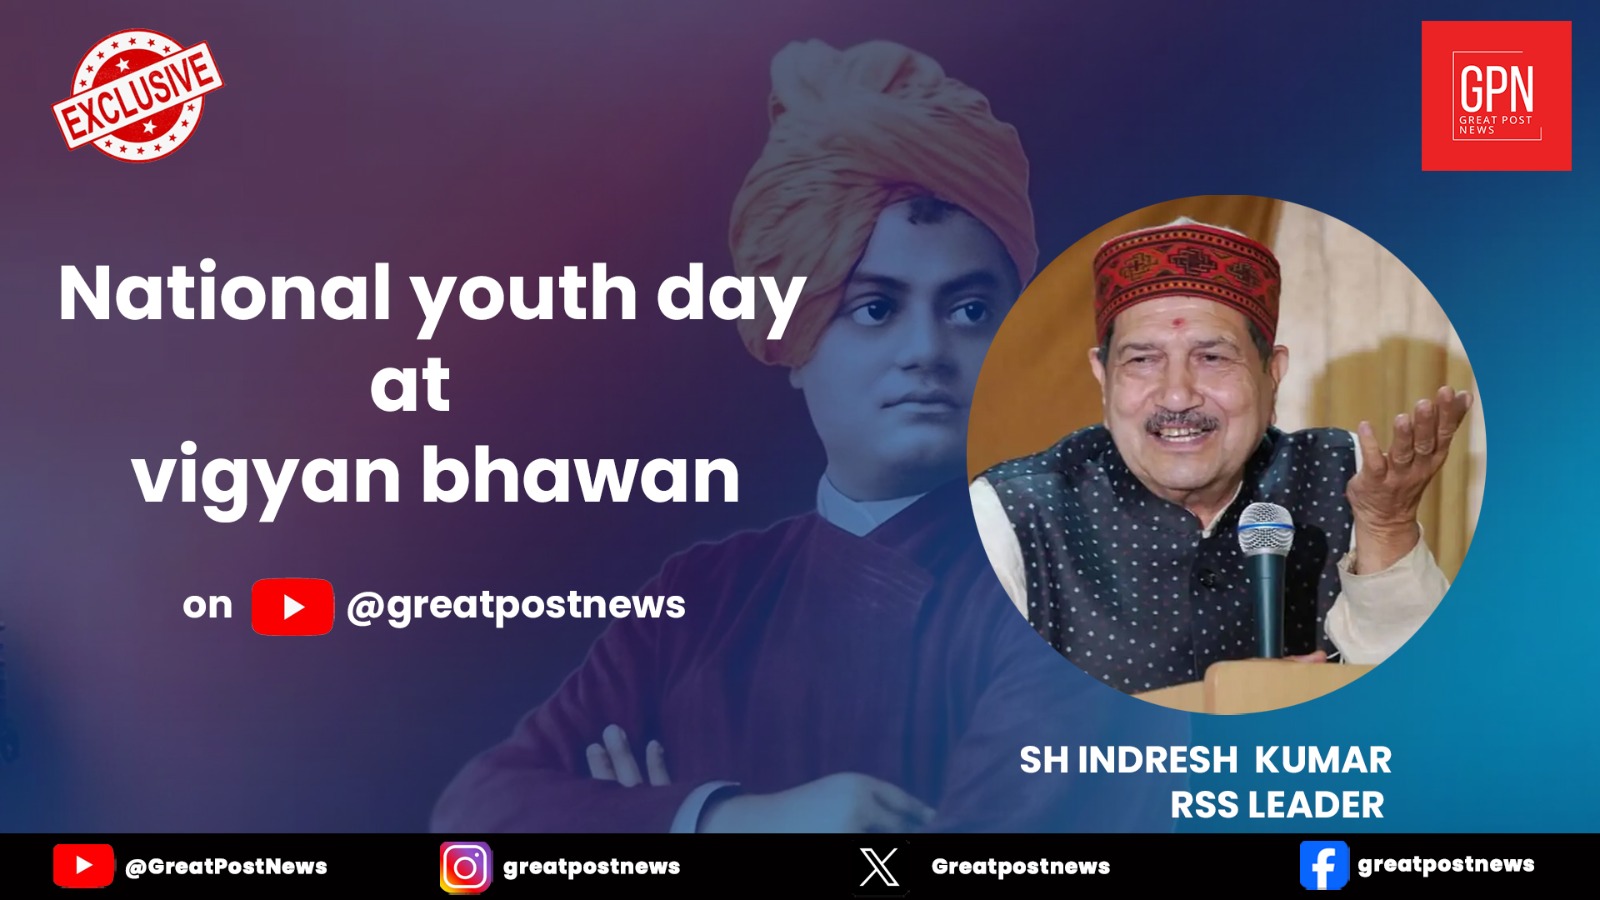 International Youth Day|Celebrate the Power of YOUTH at Vigyan Bhawan Delhi | Live telecast by GPN